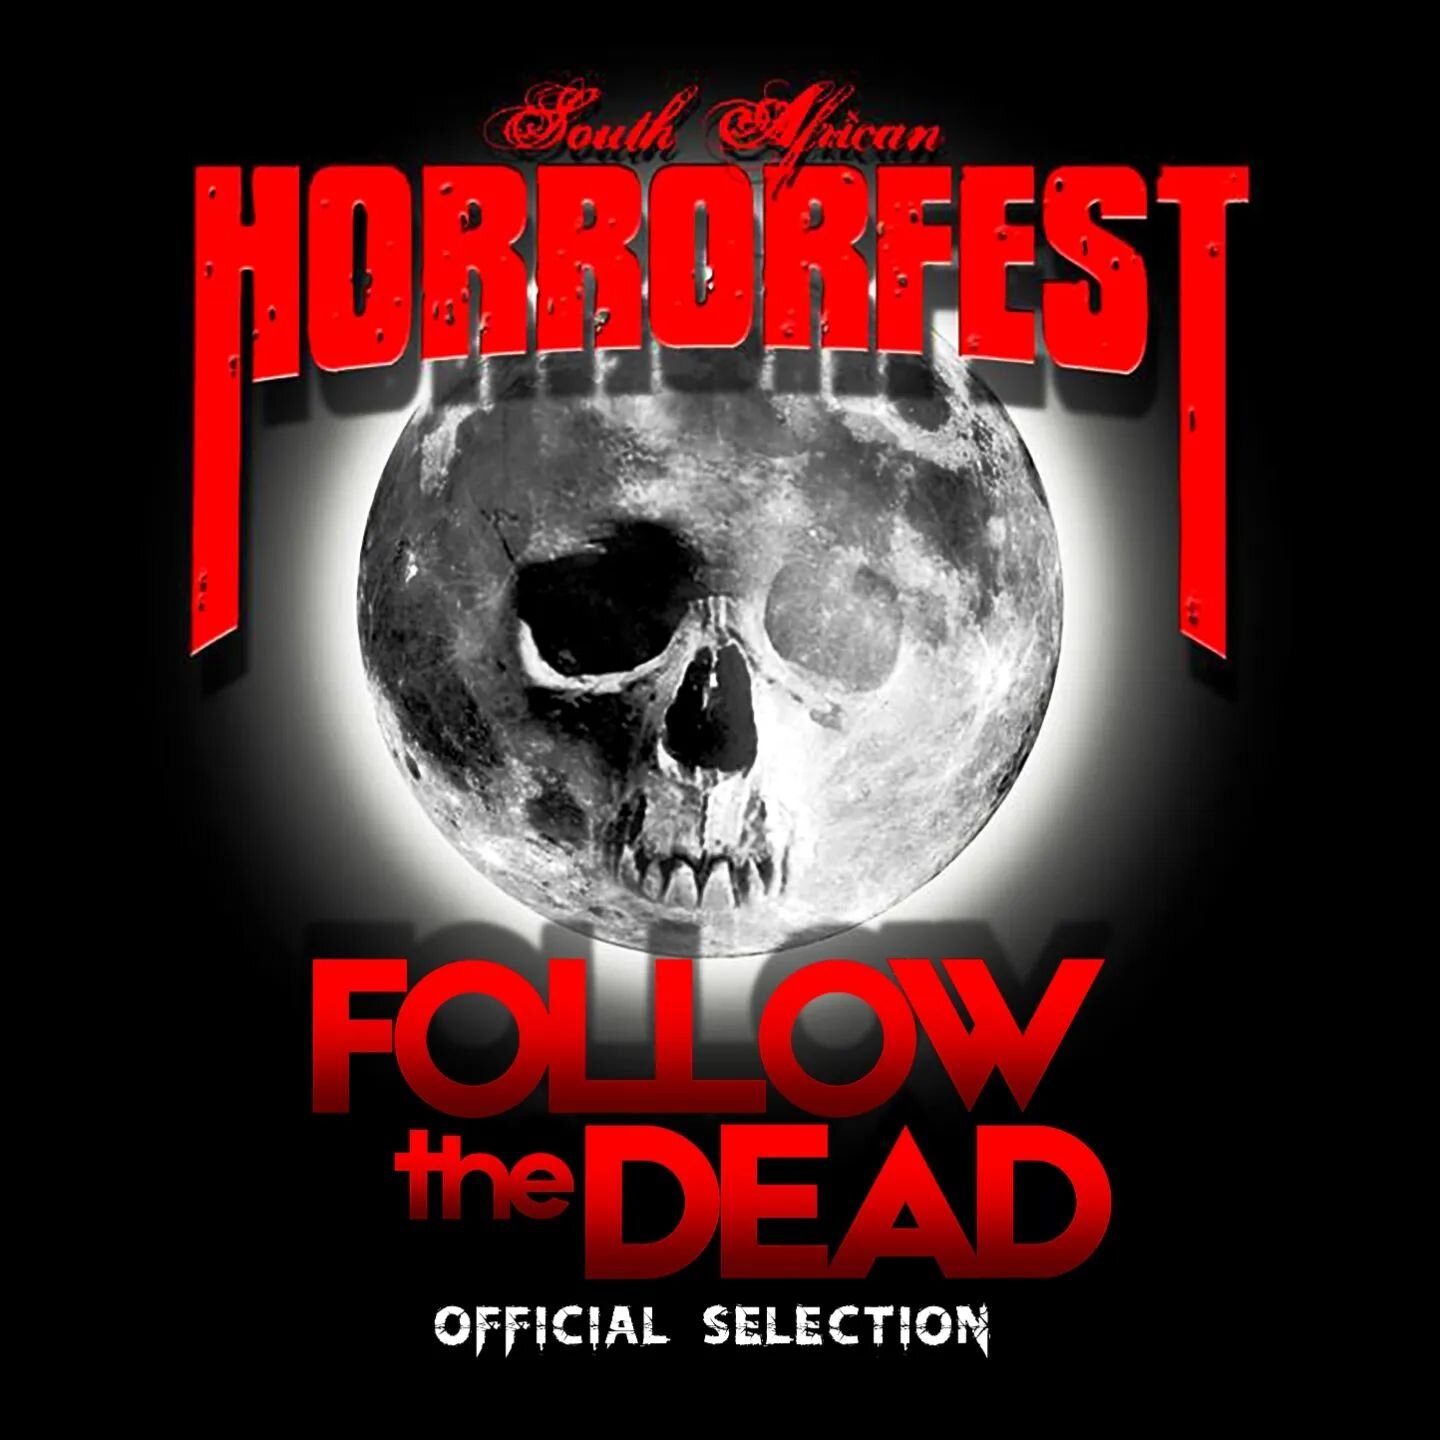 🇿🇦 CREEPY CELTIC COMEDY COMES TO CAPETOWN 🧟&zwj;♂️

Follow the Dead will now have the honour of screening on yet another continent as we make our way to its &quot;only horror-dedicated annual event&quot;, the South African Horrorfest 🌍📽

Thanks 